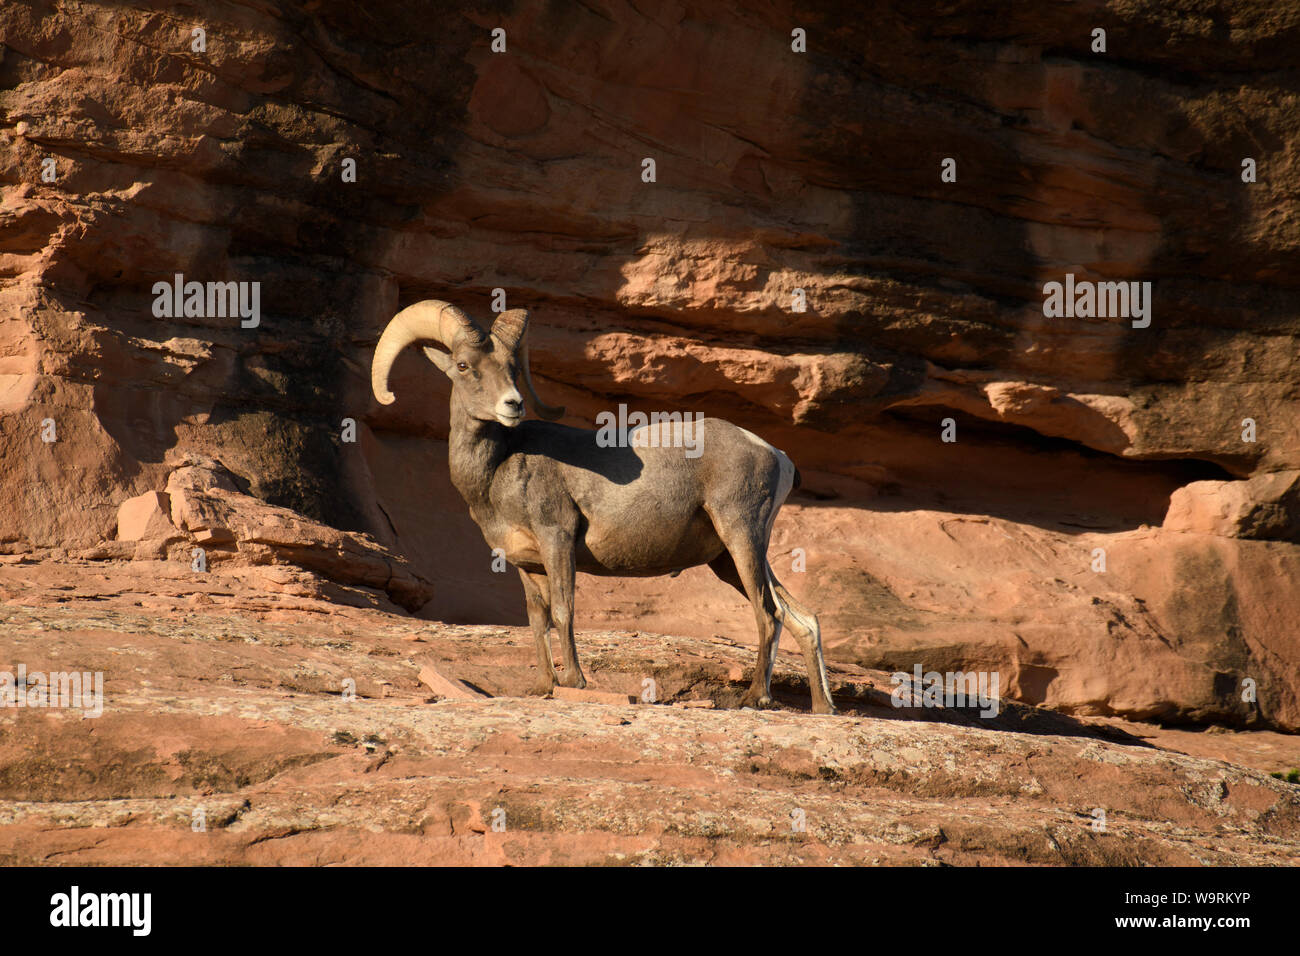 North America, American, USA, Southwes t, Grand Junction, Colorado National Monument, Ovis canadensis, Dickhornschafen *** Local Caption *** Stockfoto